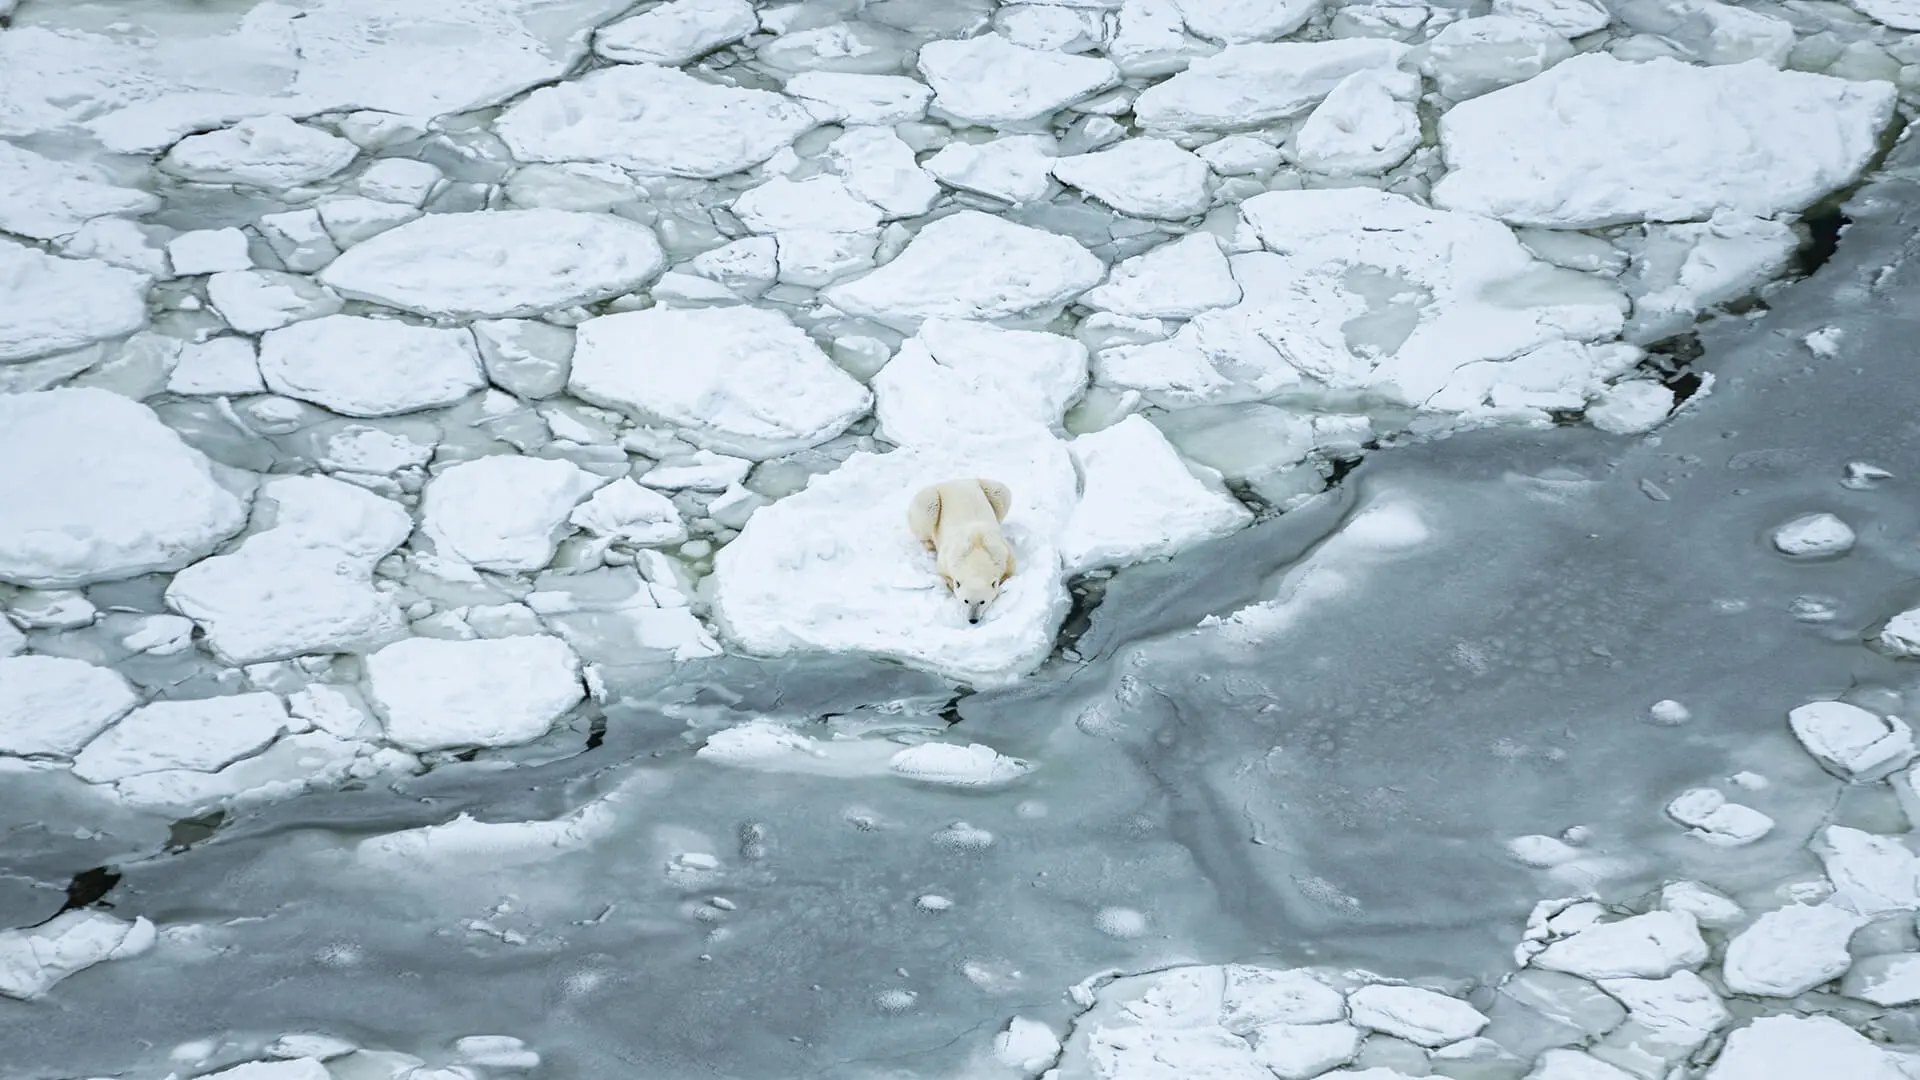 On the ground in Churchill: Polar bears fight for survival as ice disappears